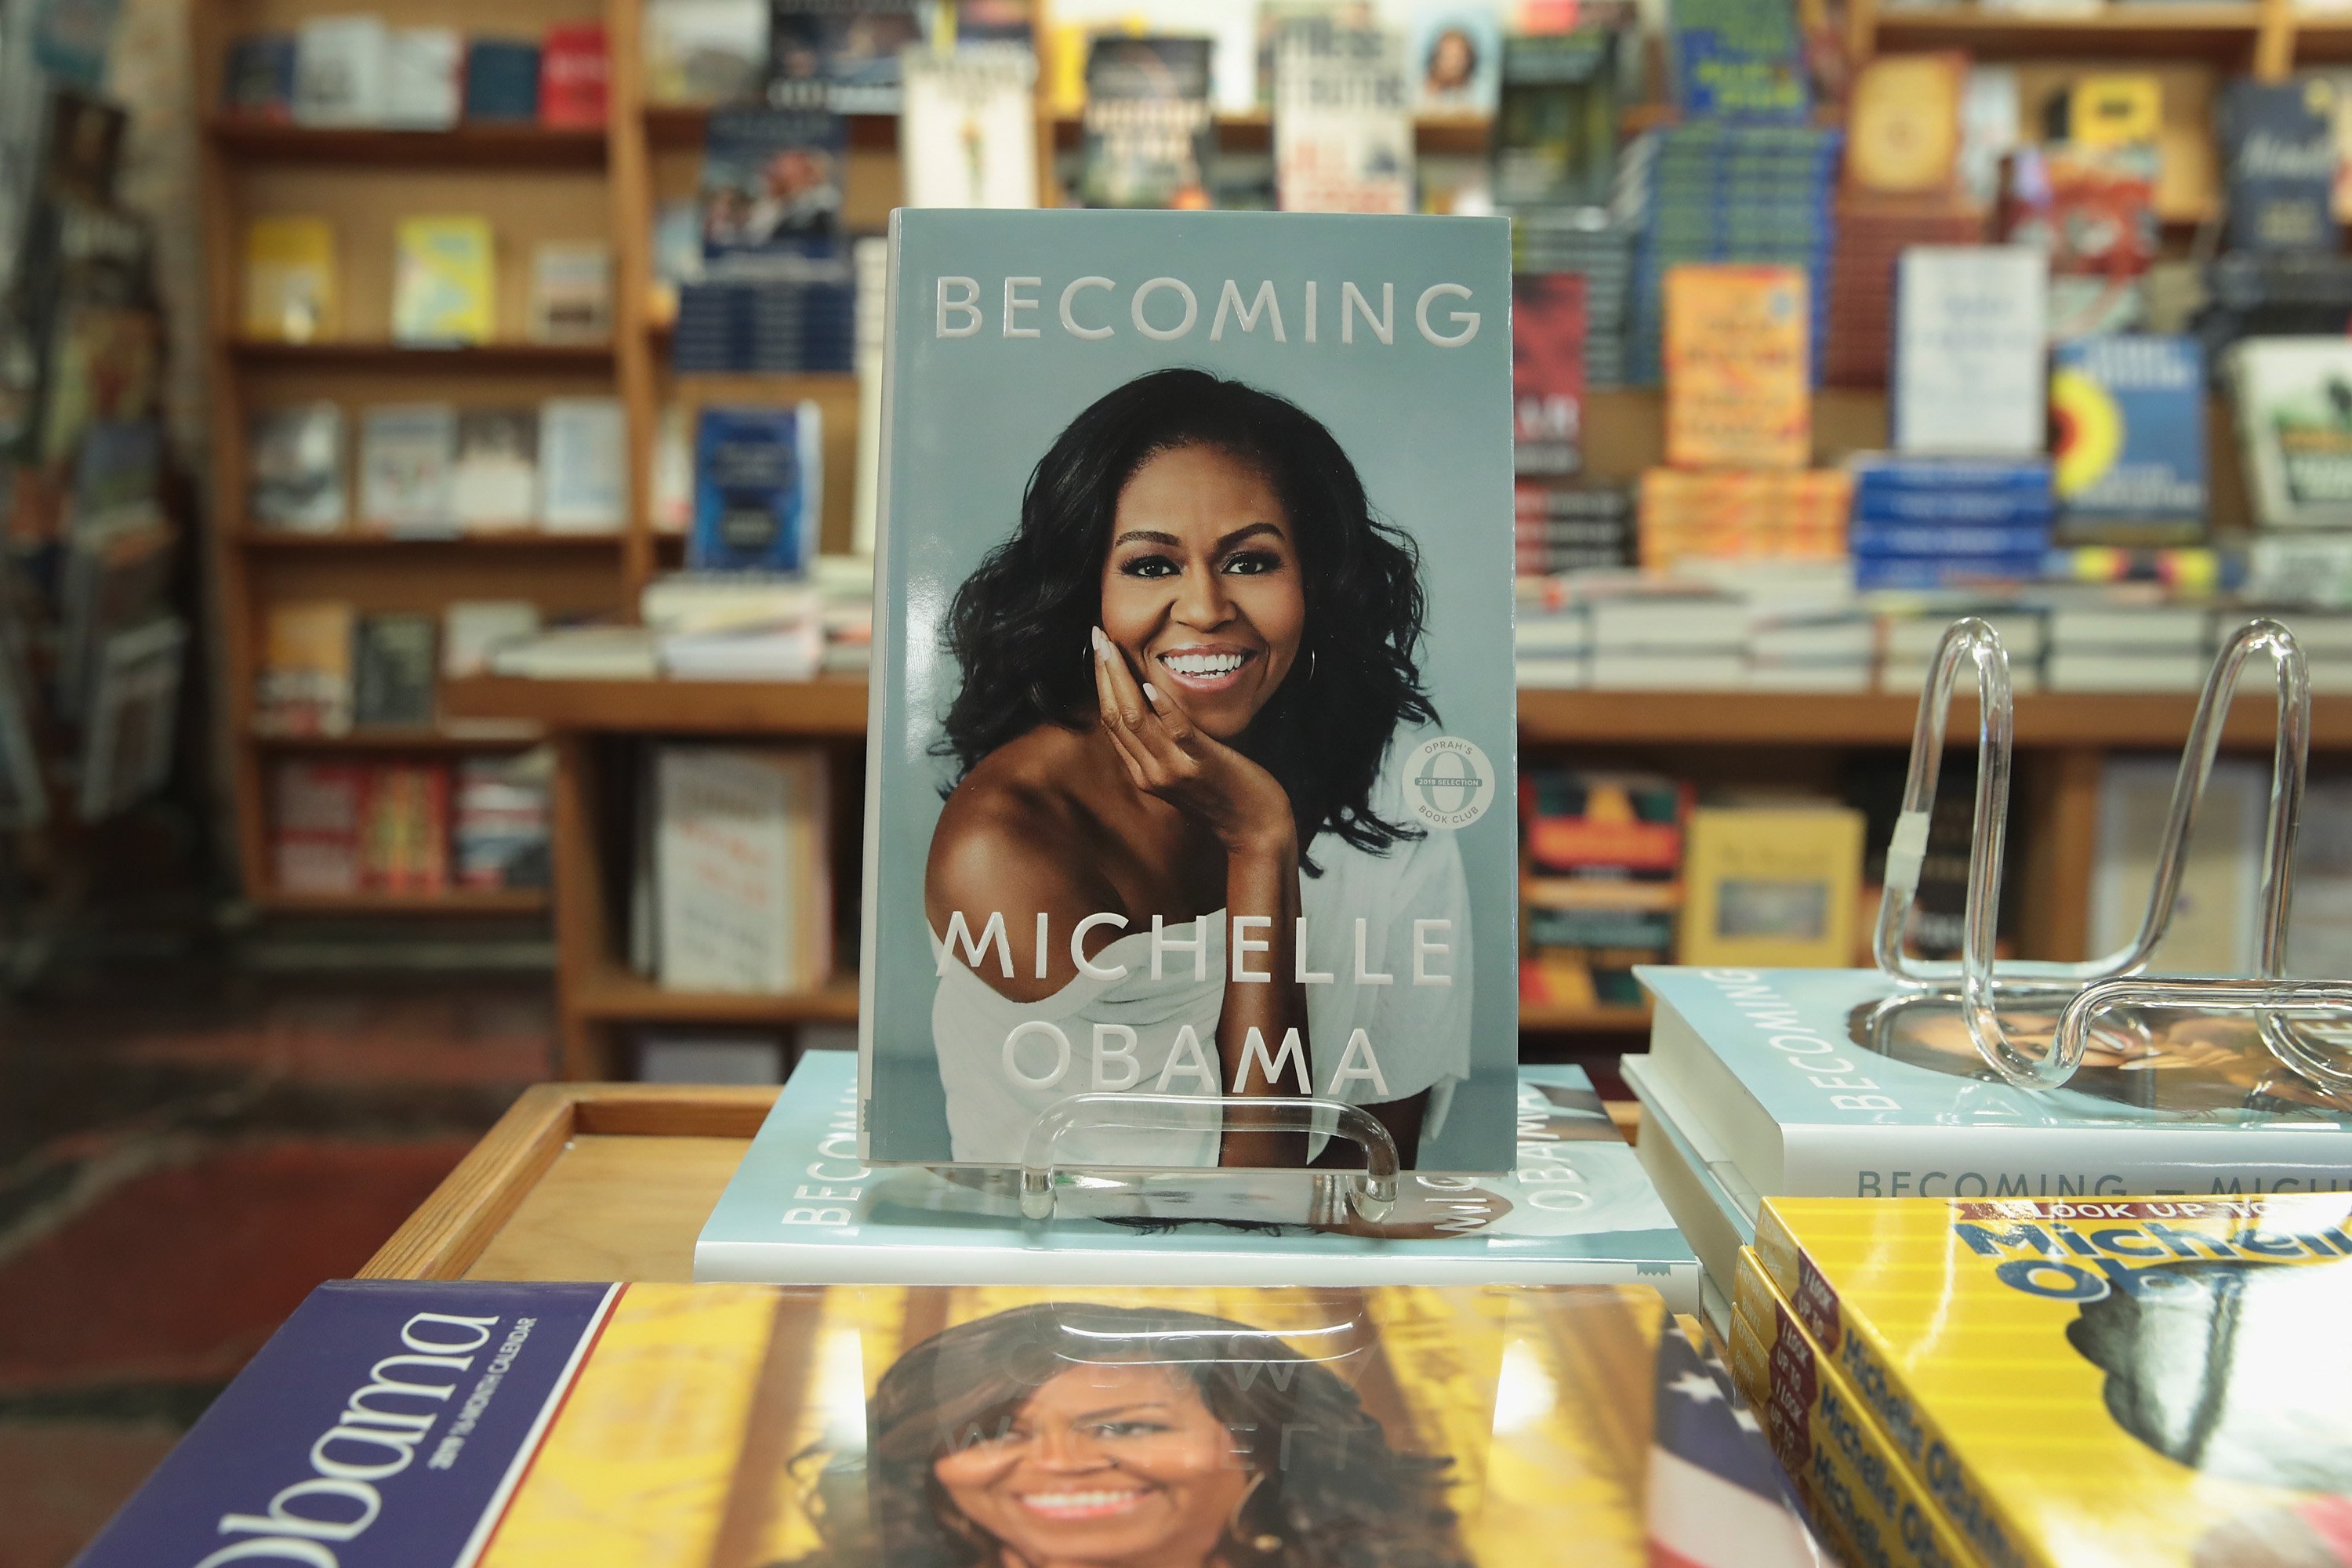 Michelle Obama's memoir "Becoming"  has been 15 weeks on the New York Times’ Best Sellers list. | Photo: GettyImages/Global Images of Ukraine